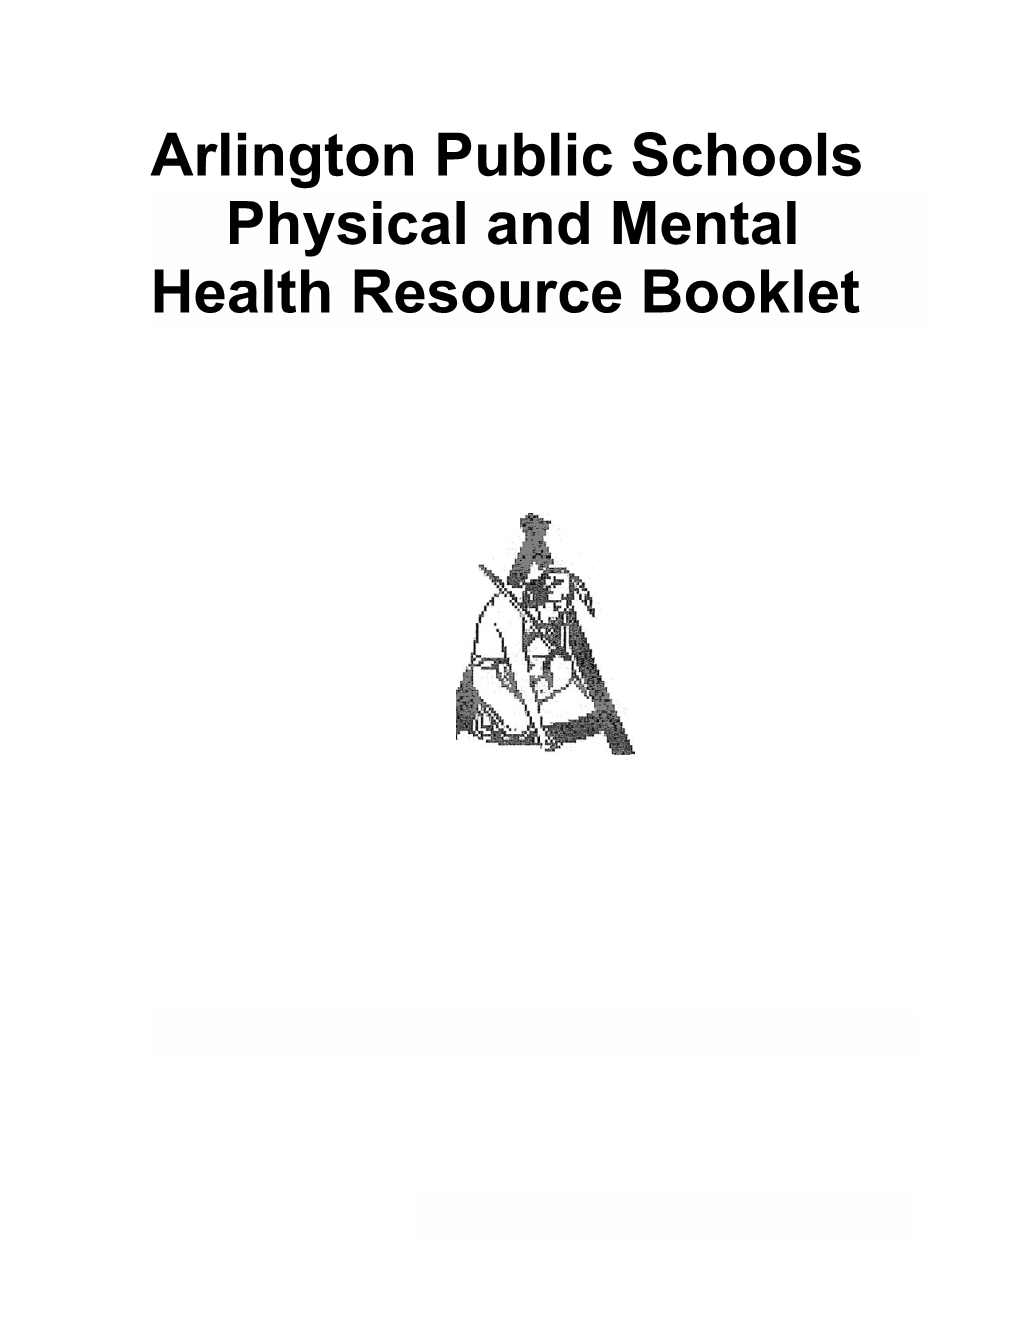 Arlington Public Schools Physical and Mental Health Resource Booklet